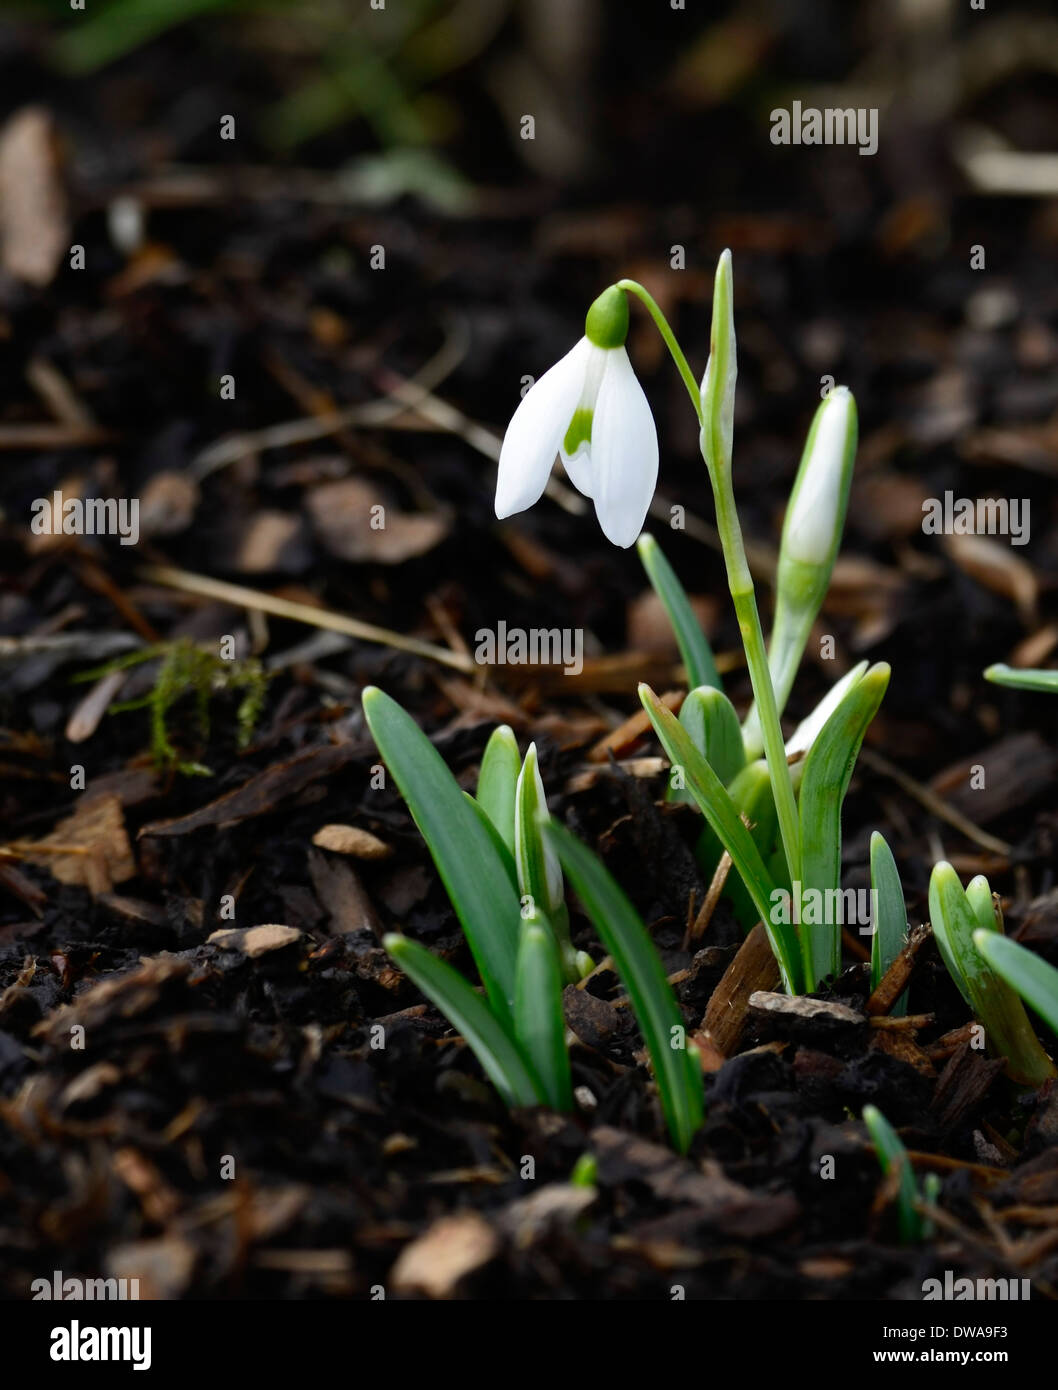 Galanthus chedworth snowdrop white flowers green markings flowers bulbs snowdrops Stock Photo